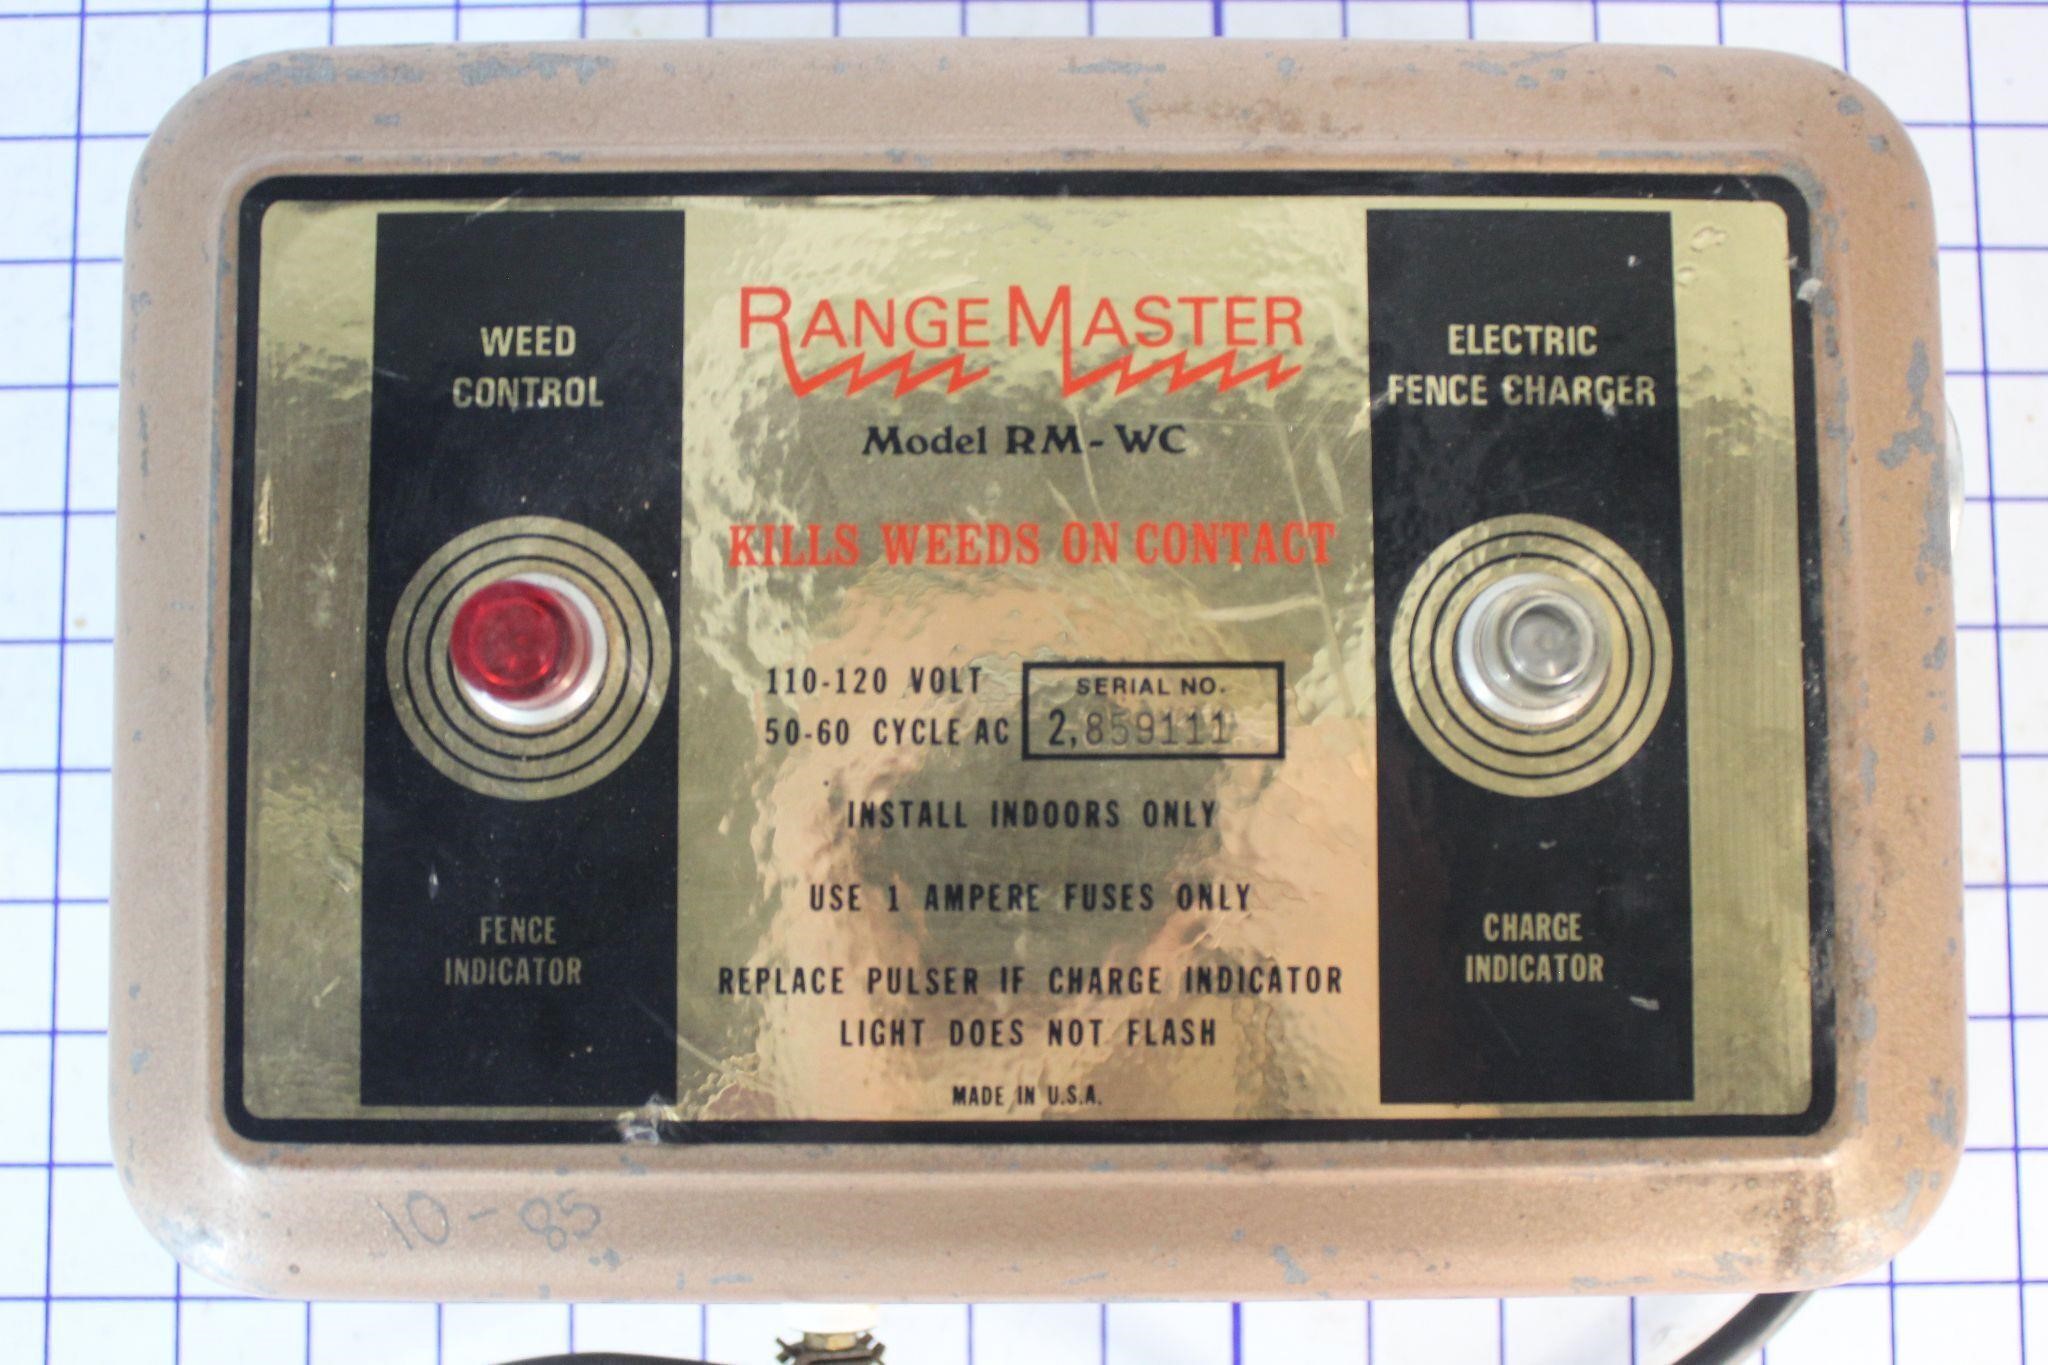 RANGE MASTER M: RM-WC ELECTRIC FENCE CHARGER